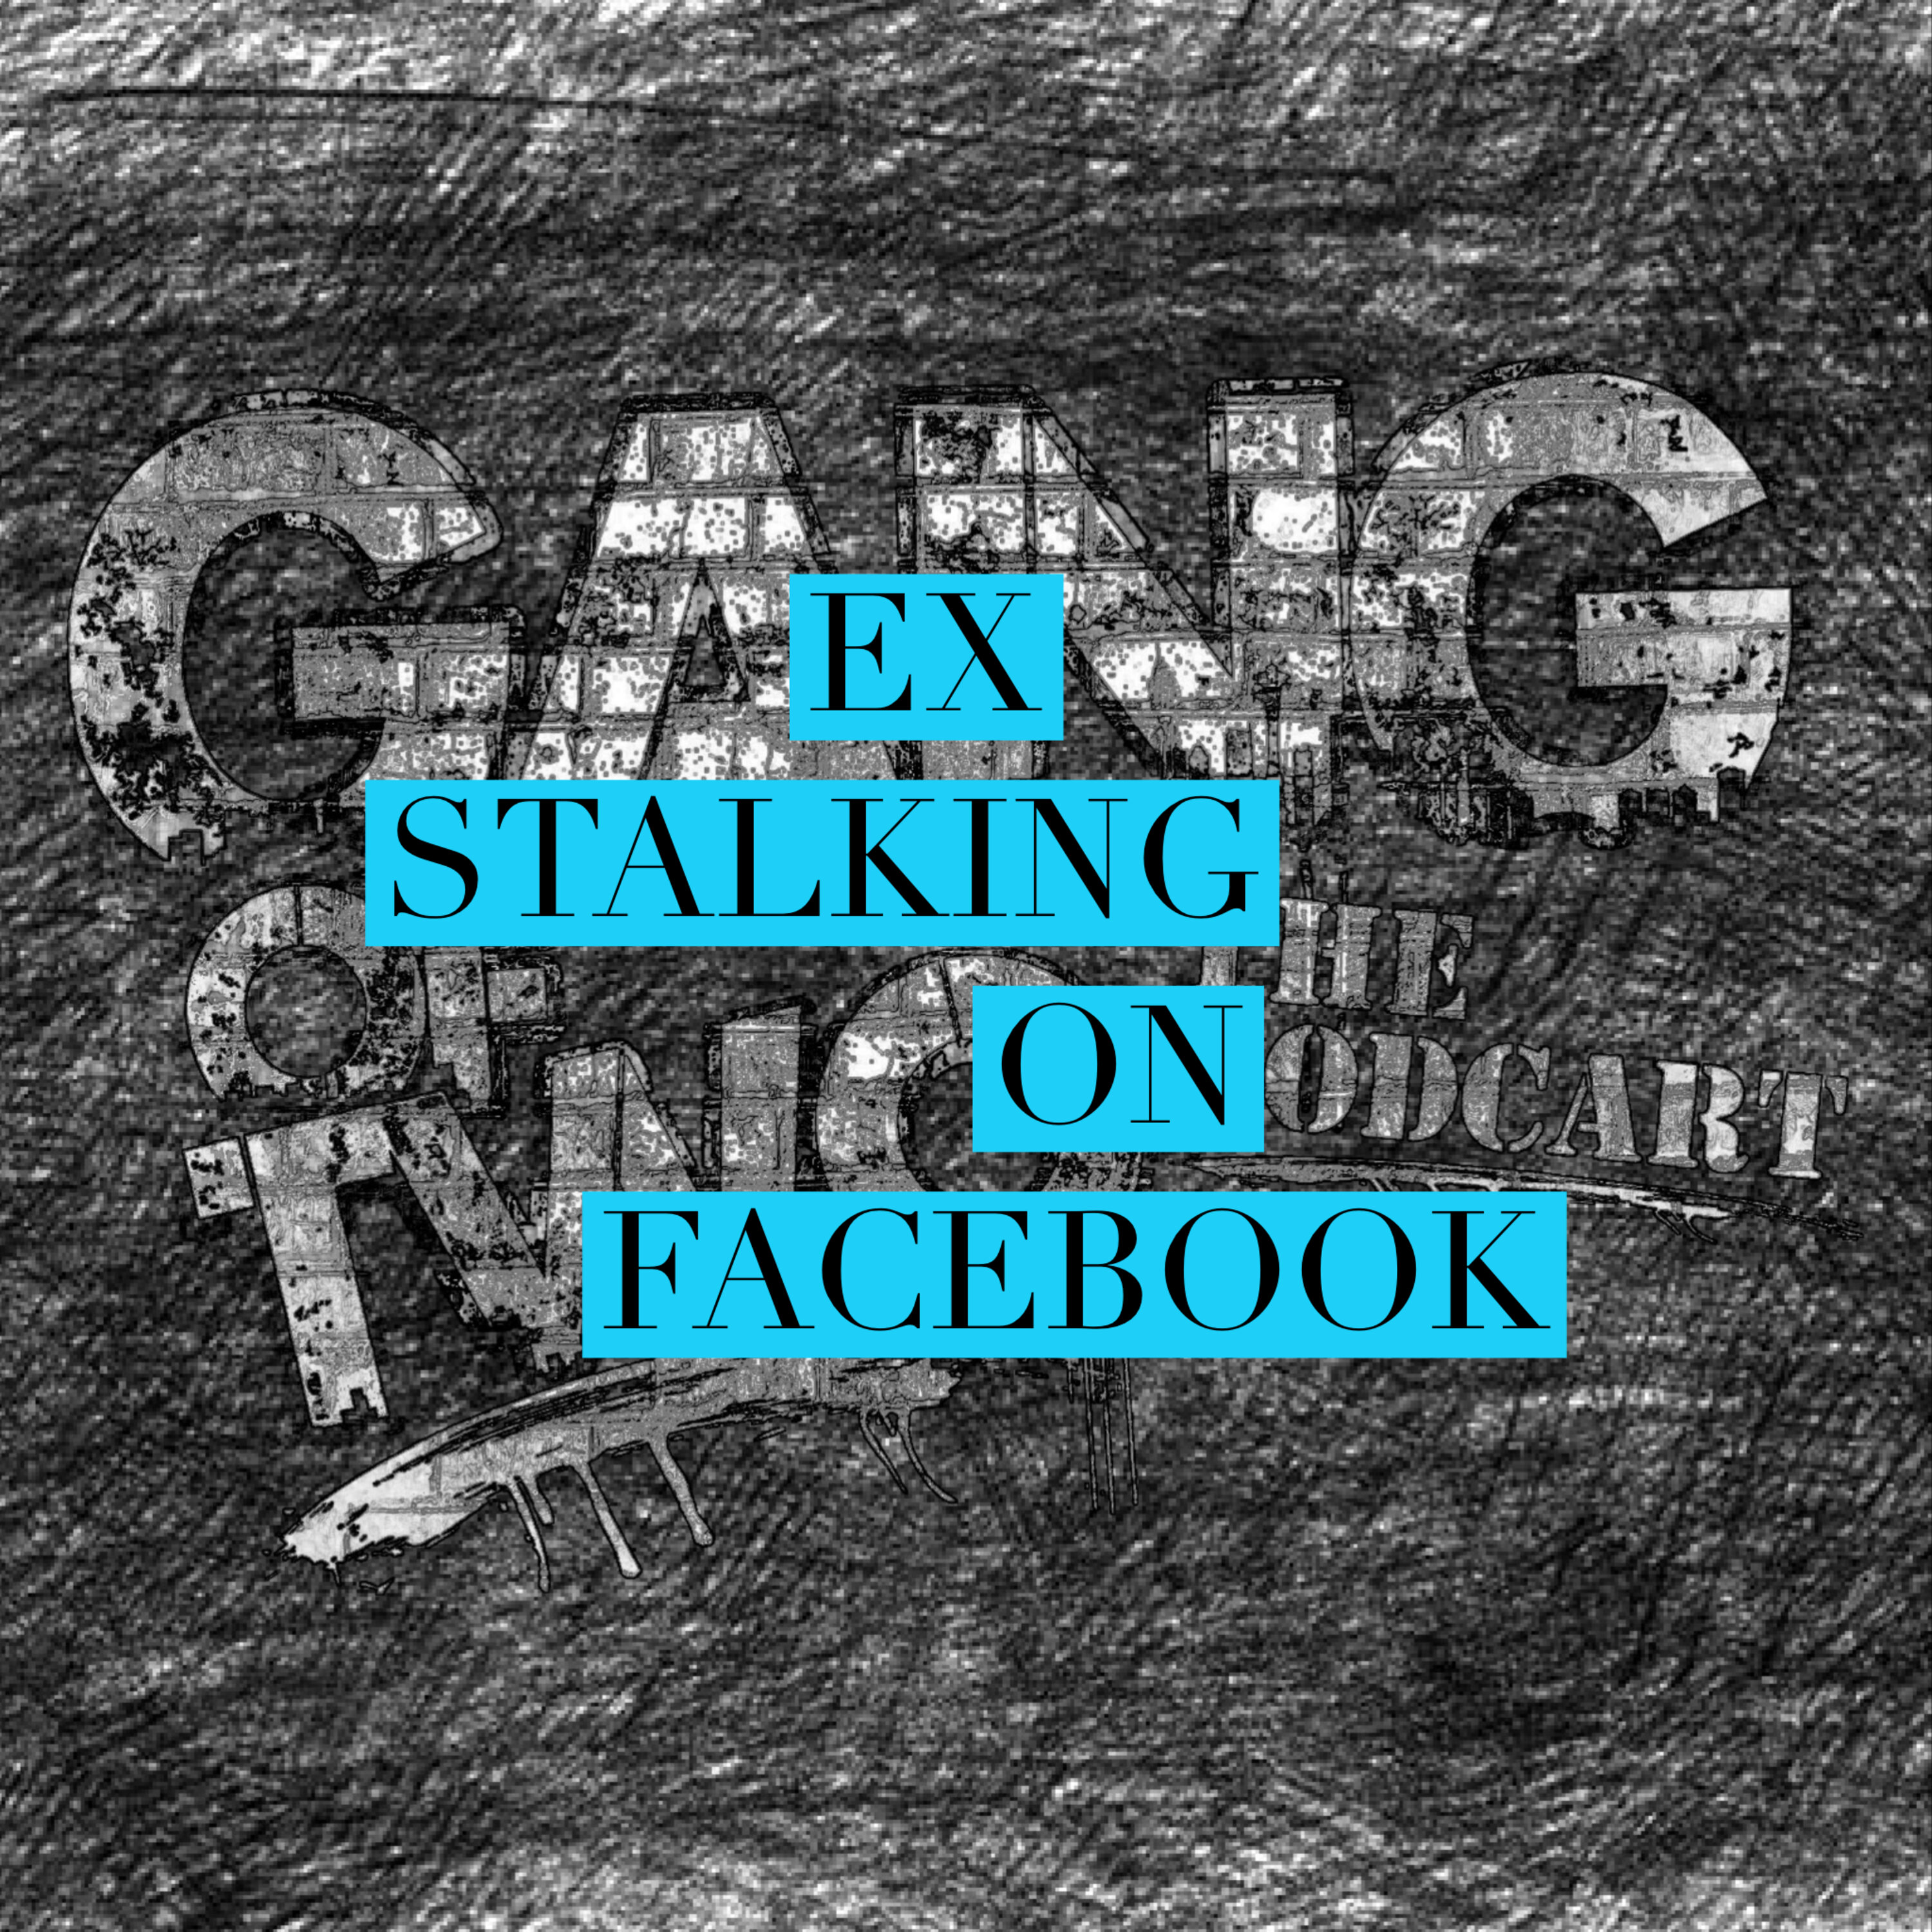 HOW TO DEAL WITH AN EX STALKING YOU ON SOCIAL MEDIA